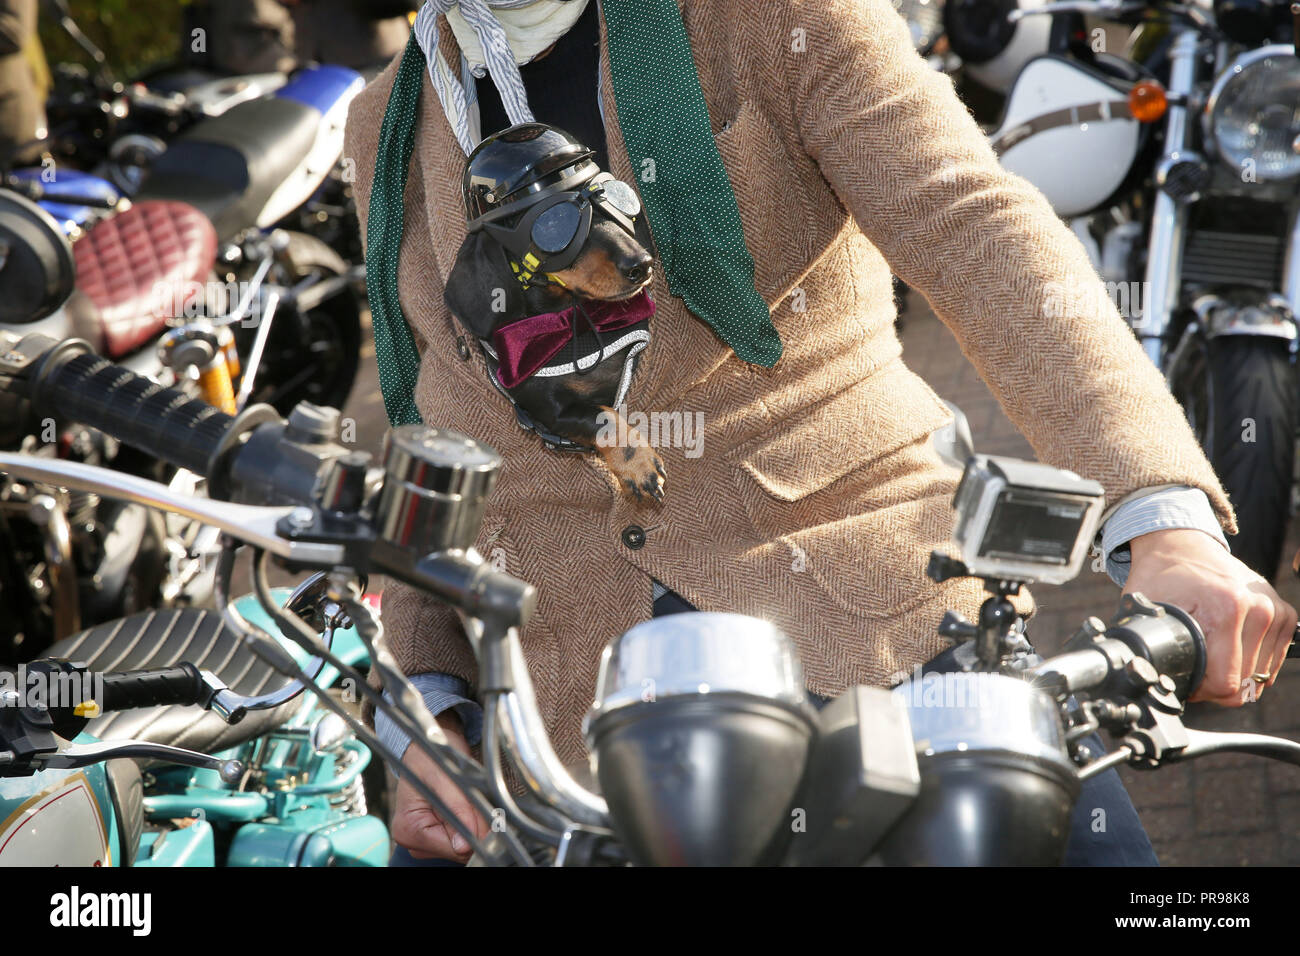 EDITORIAL USE ONLY Dachshund dog Sergeant Pepper arrives at the start of the Distinguished Gentleman's Ride, which will see hundreds of stylish bikers on their vintage bikes tour the capital to raise money for the Movember Foundation. Stock Photo